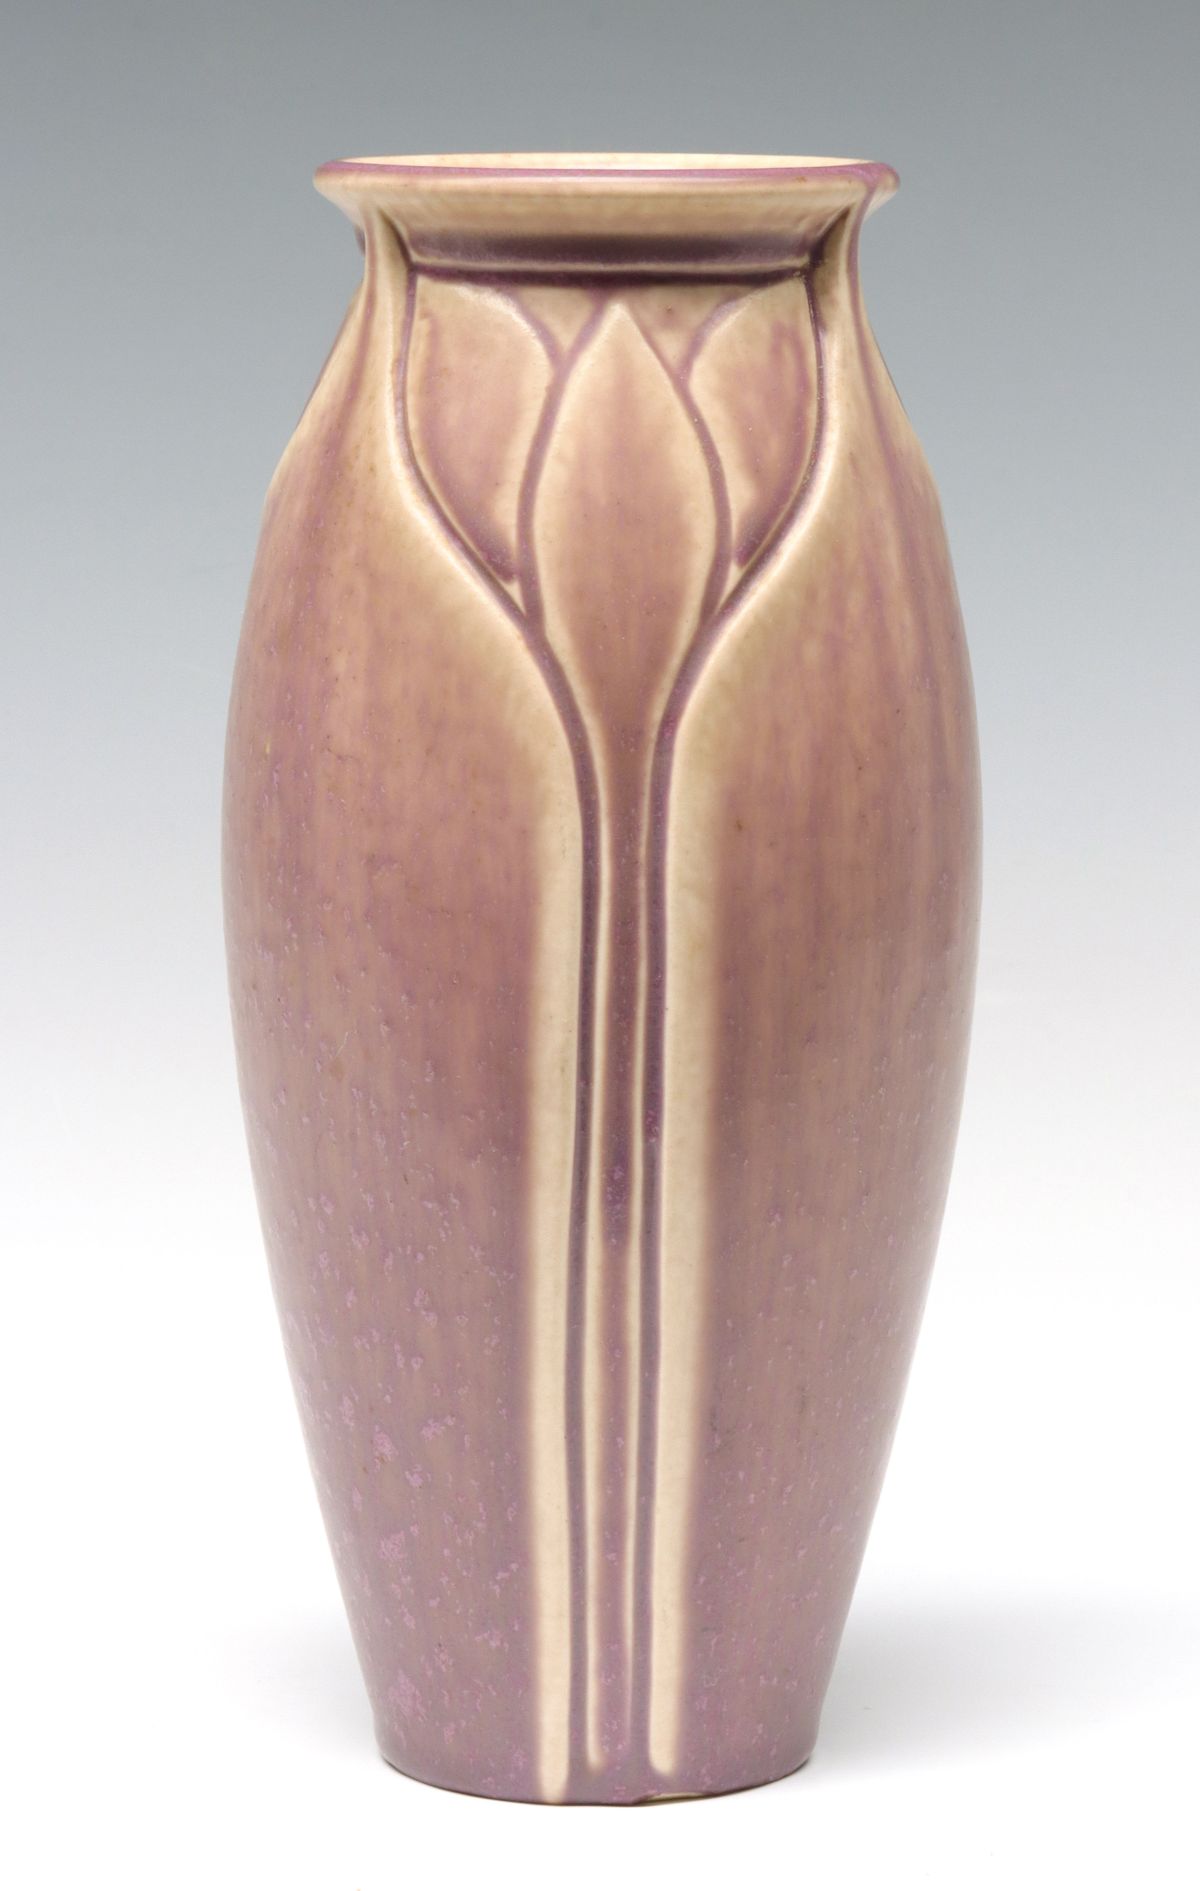 A ROOKWOOD ART POTTERY VASE DATED 1925